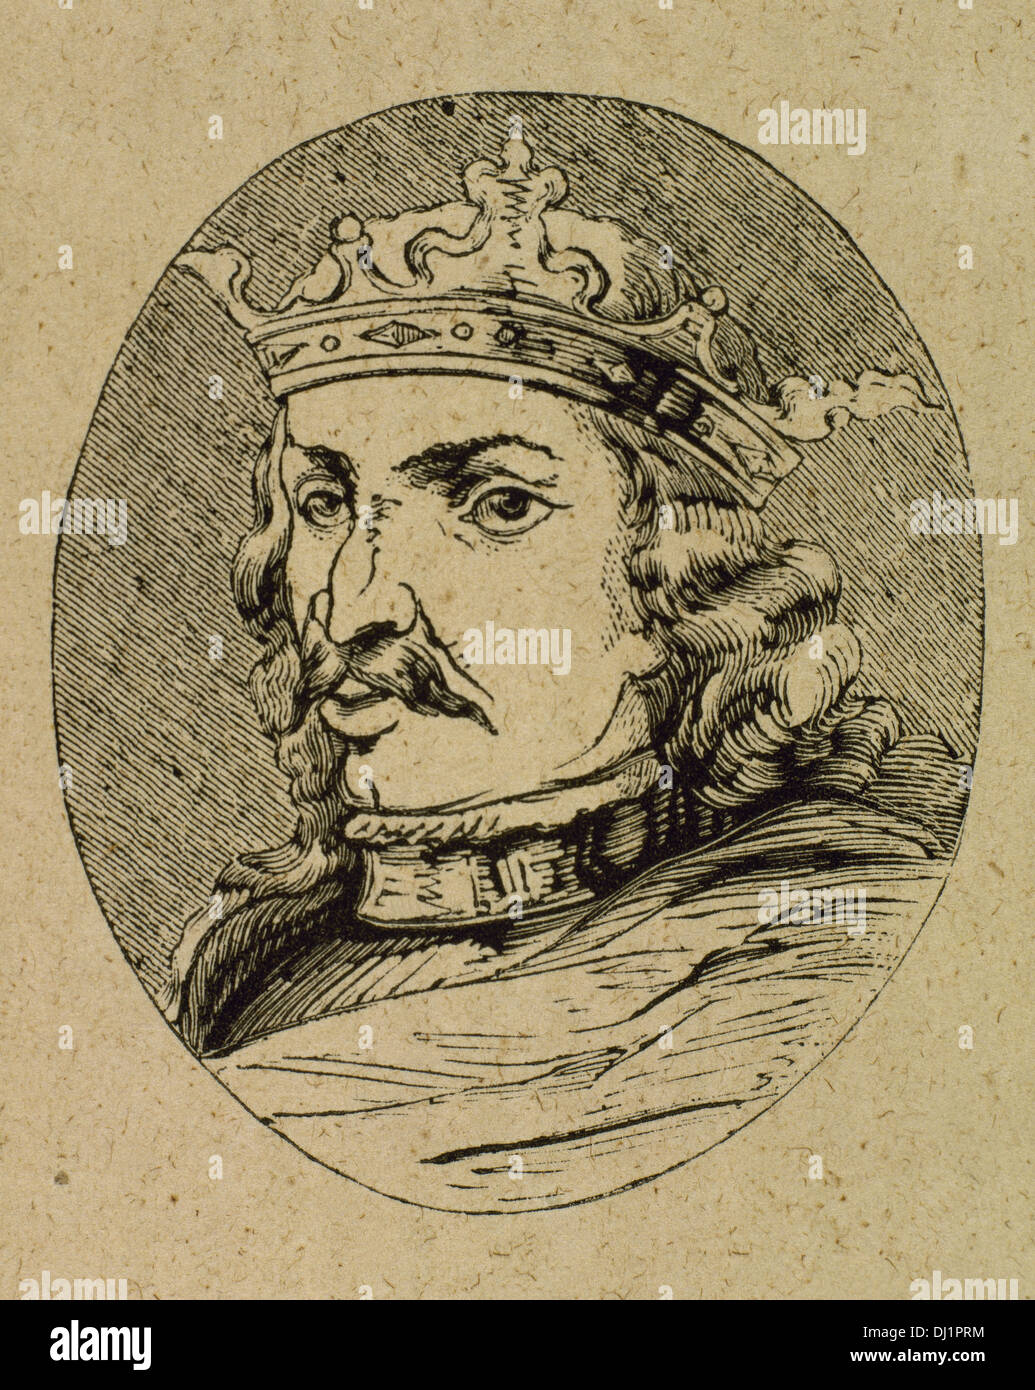 Henry IV of Castile (1425-1474). King of the Crown of Castile. Nicknamed The Impotent. Engraving. Stock Photo